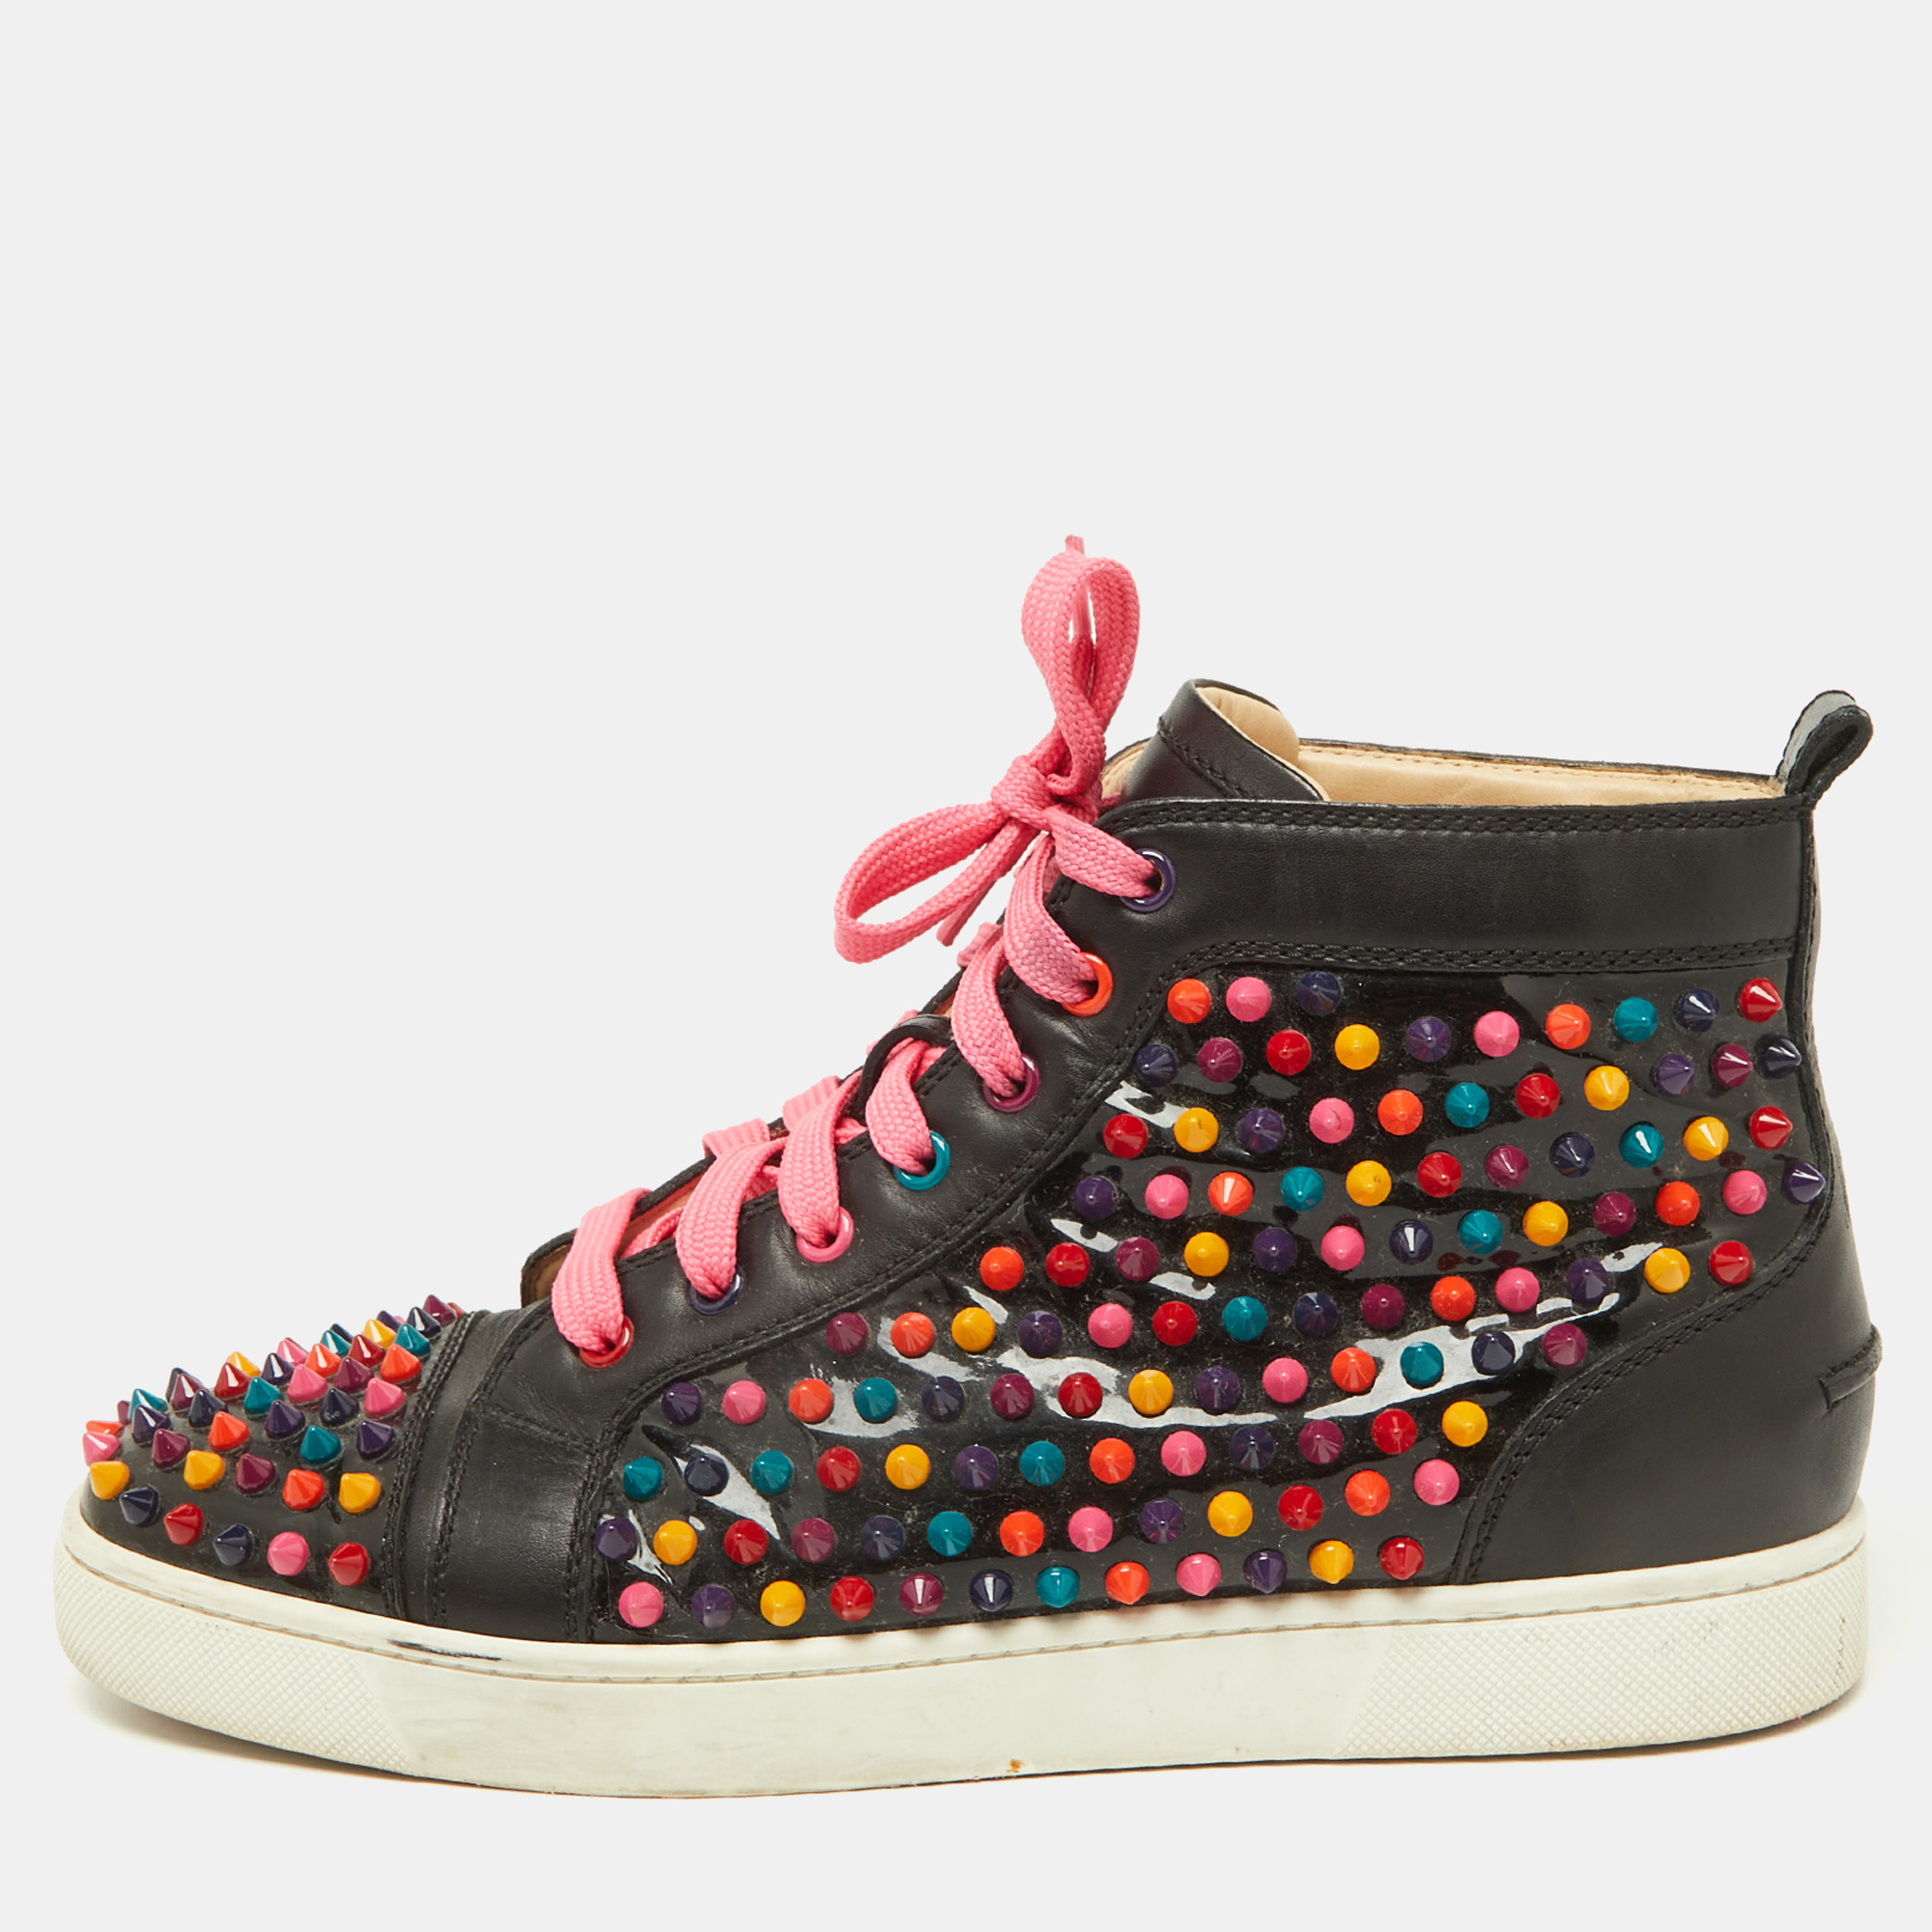 Christian louboutin black patent and leather multicolor spikes louis sneakers size 42